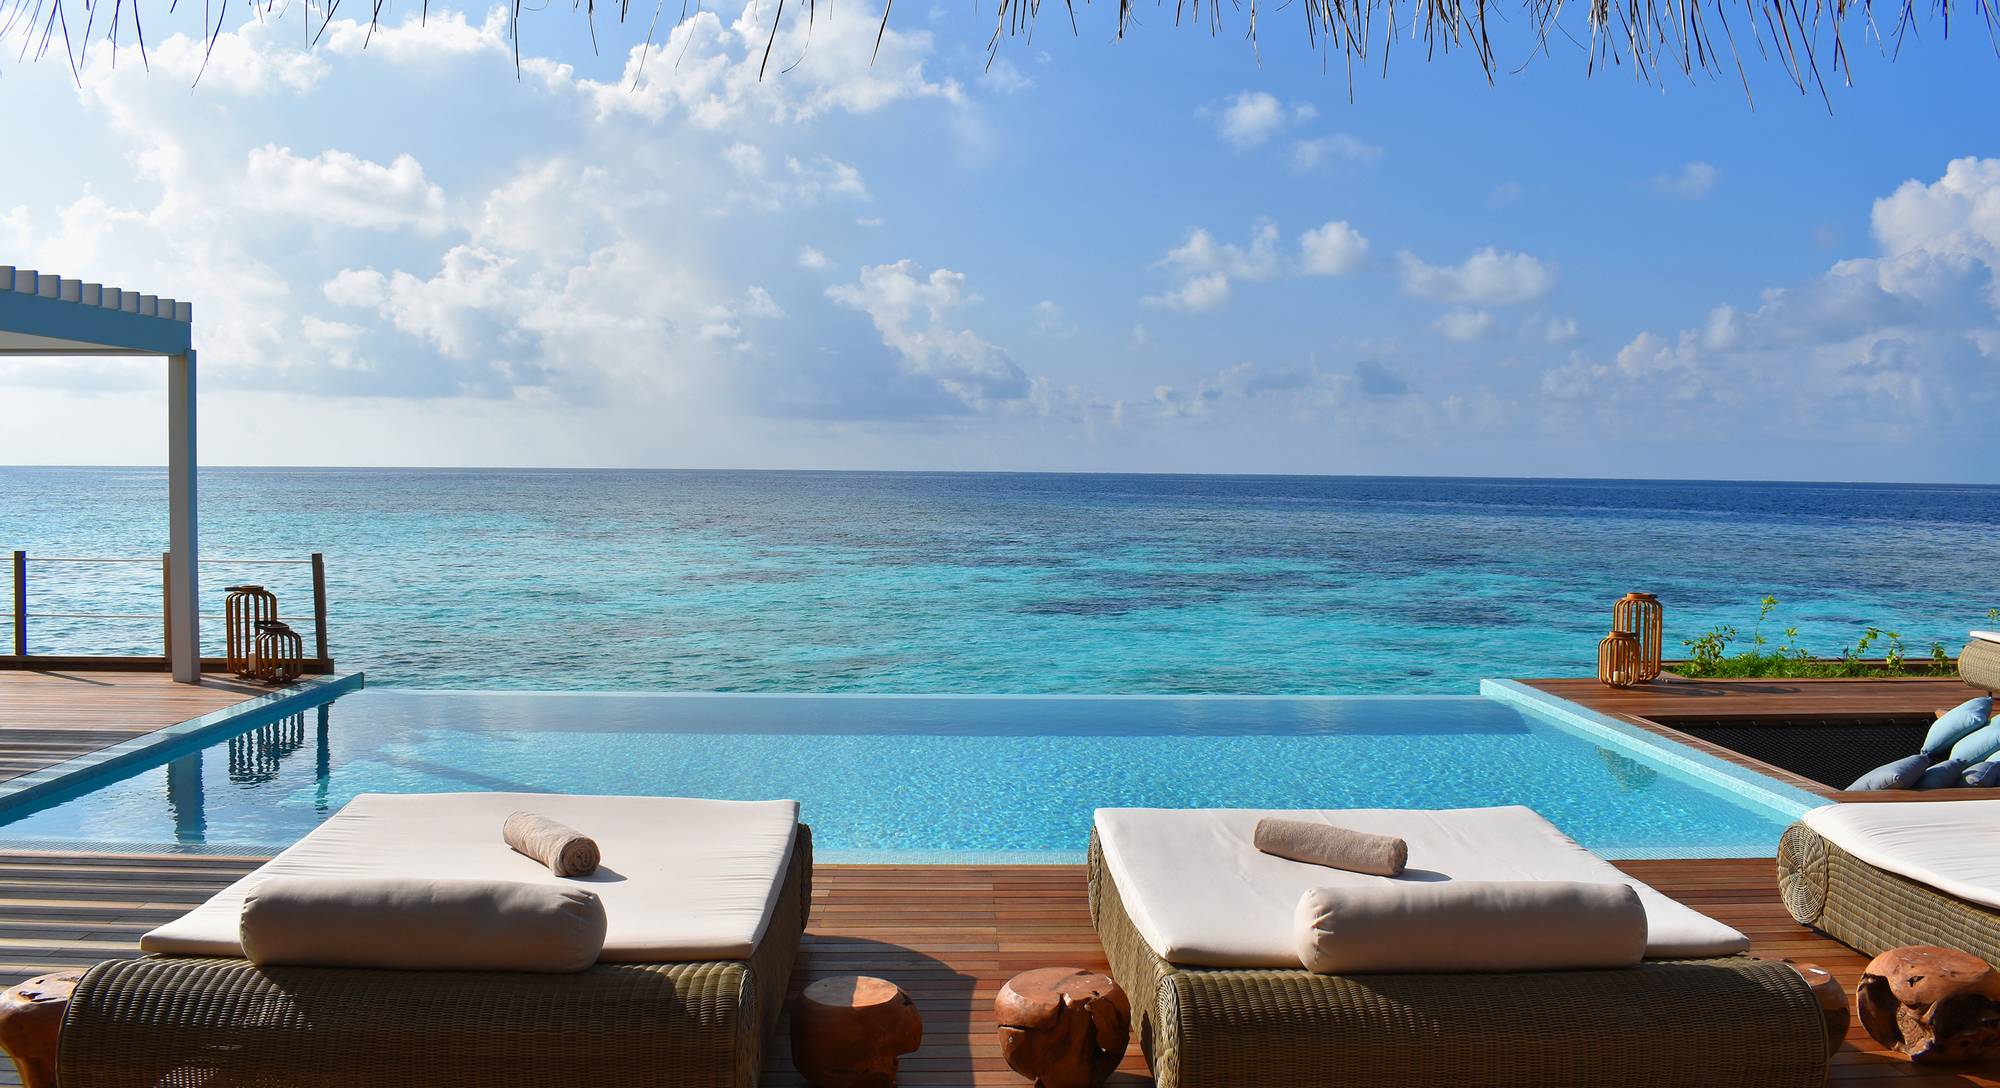 Baglioni Resort Maldives, Paradise with an Italian Touch